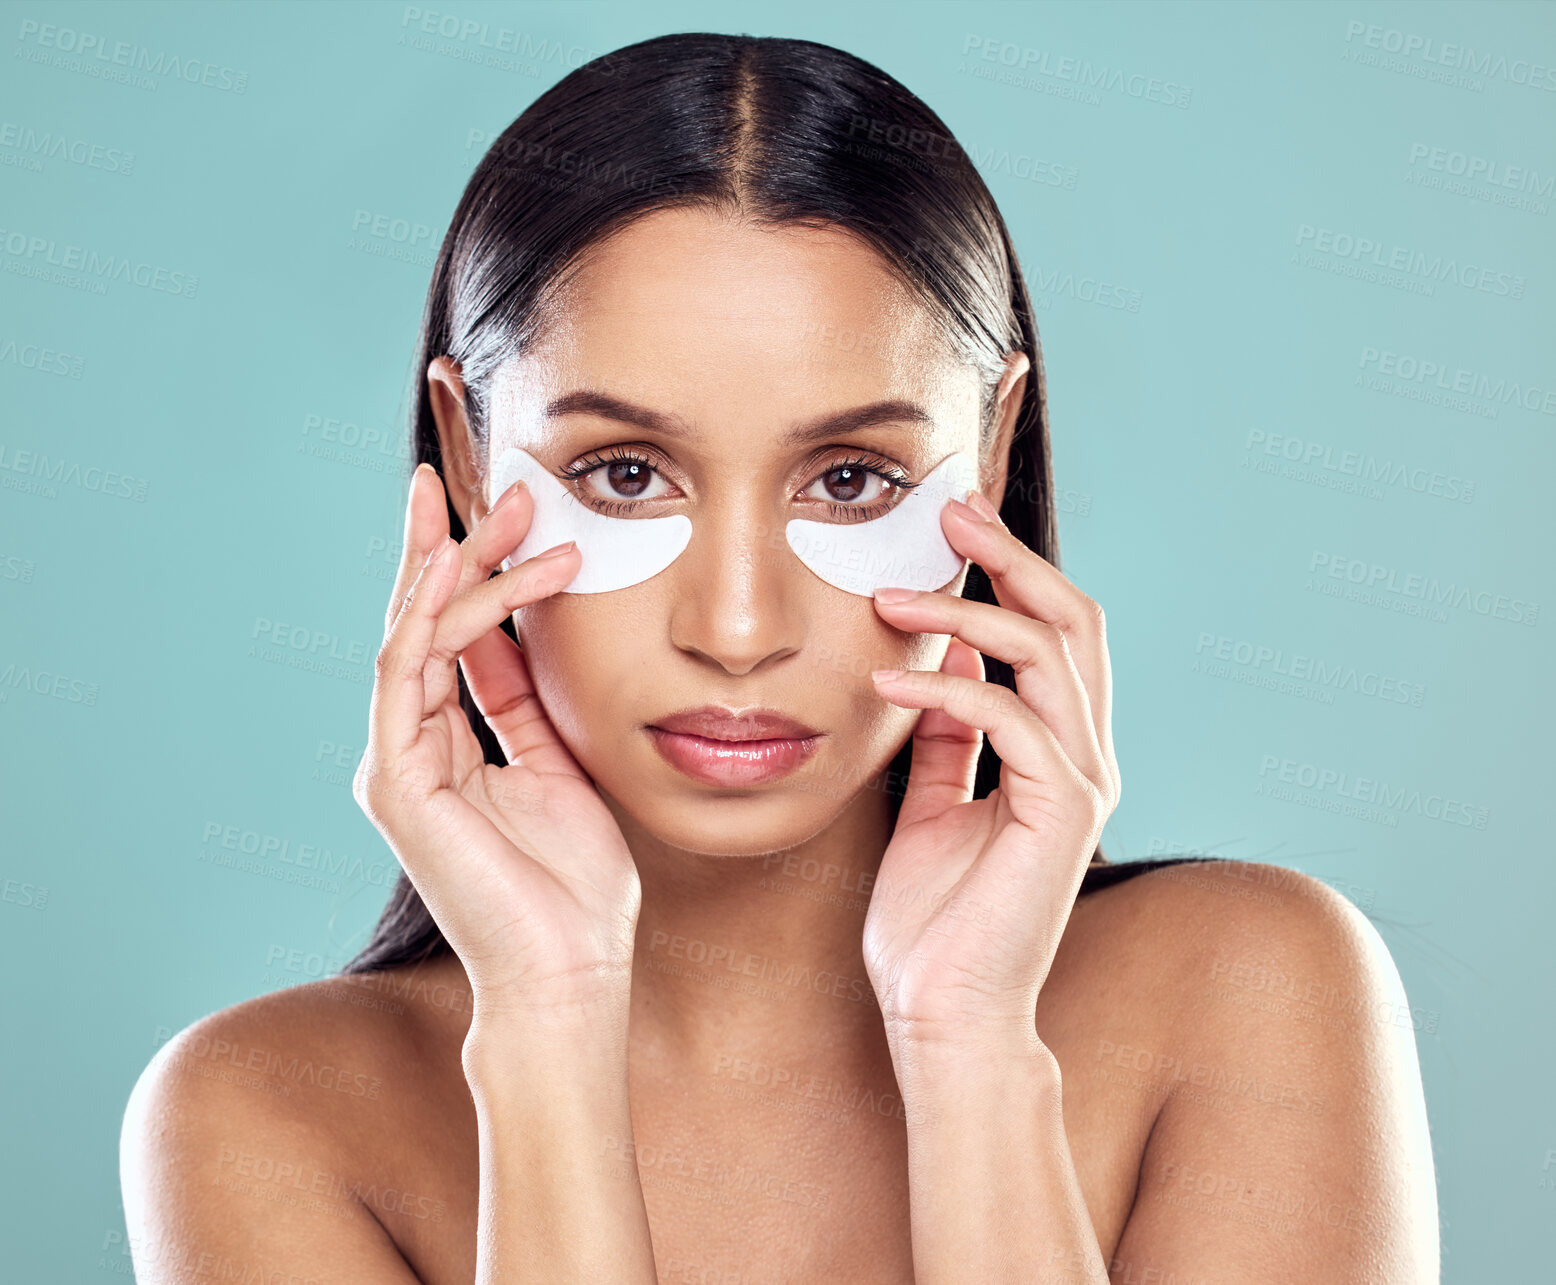 Buy stock photo Shot of a young woman using eye masks against a studio background